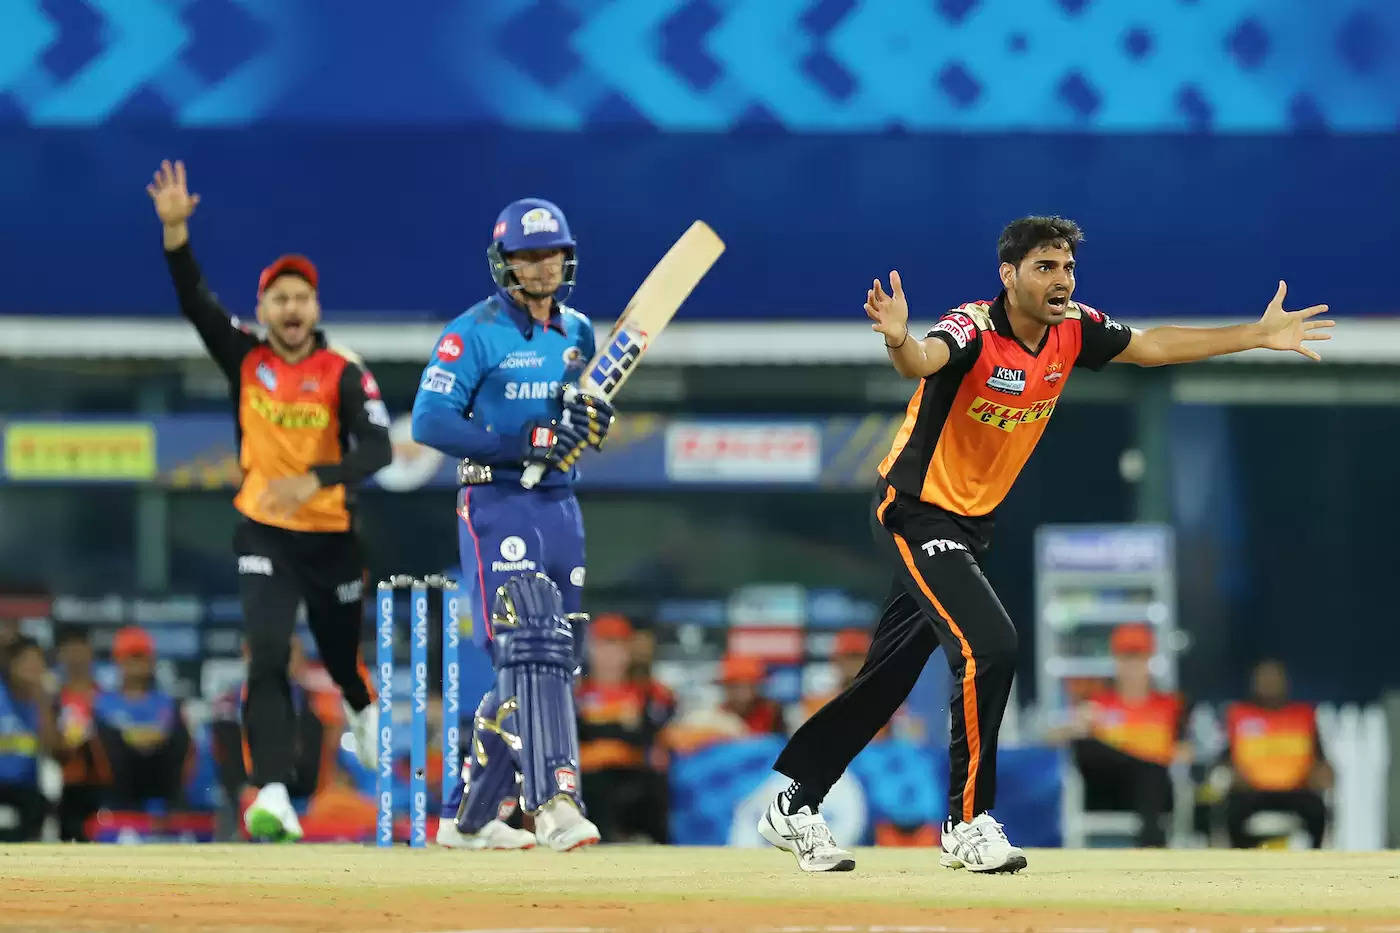 Where to Watch IPL 2021: Live Streaming and TV Details for UAE leg of IPL 2021